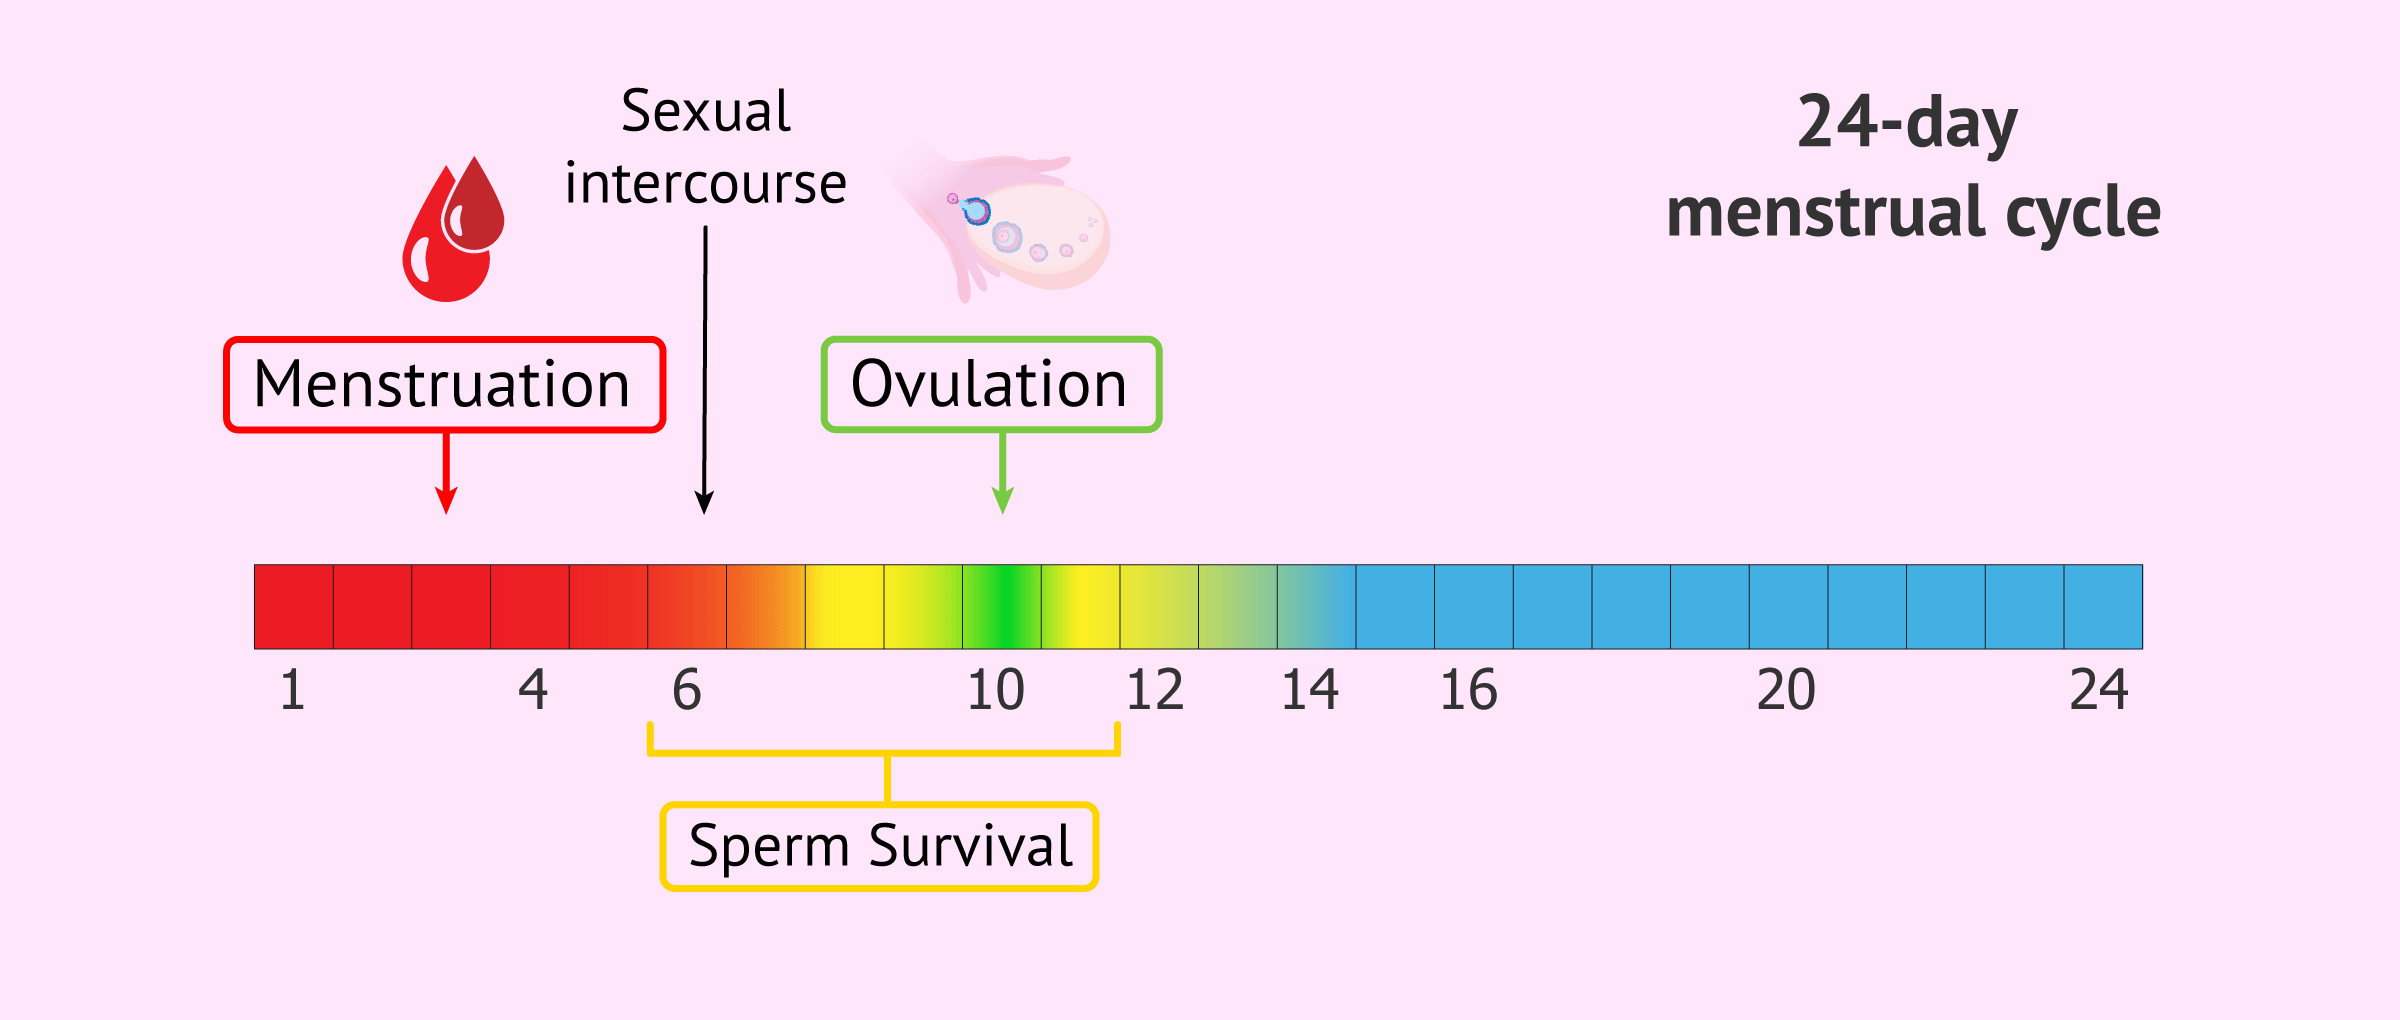 Sexual intercourse during menstruation and possibility of pregnancy